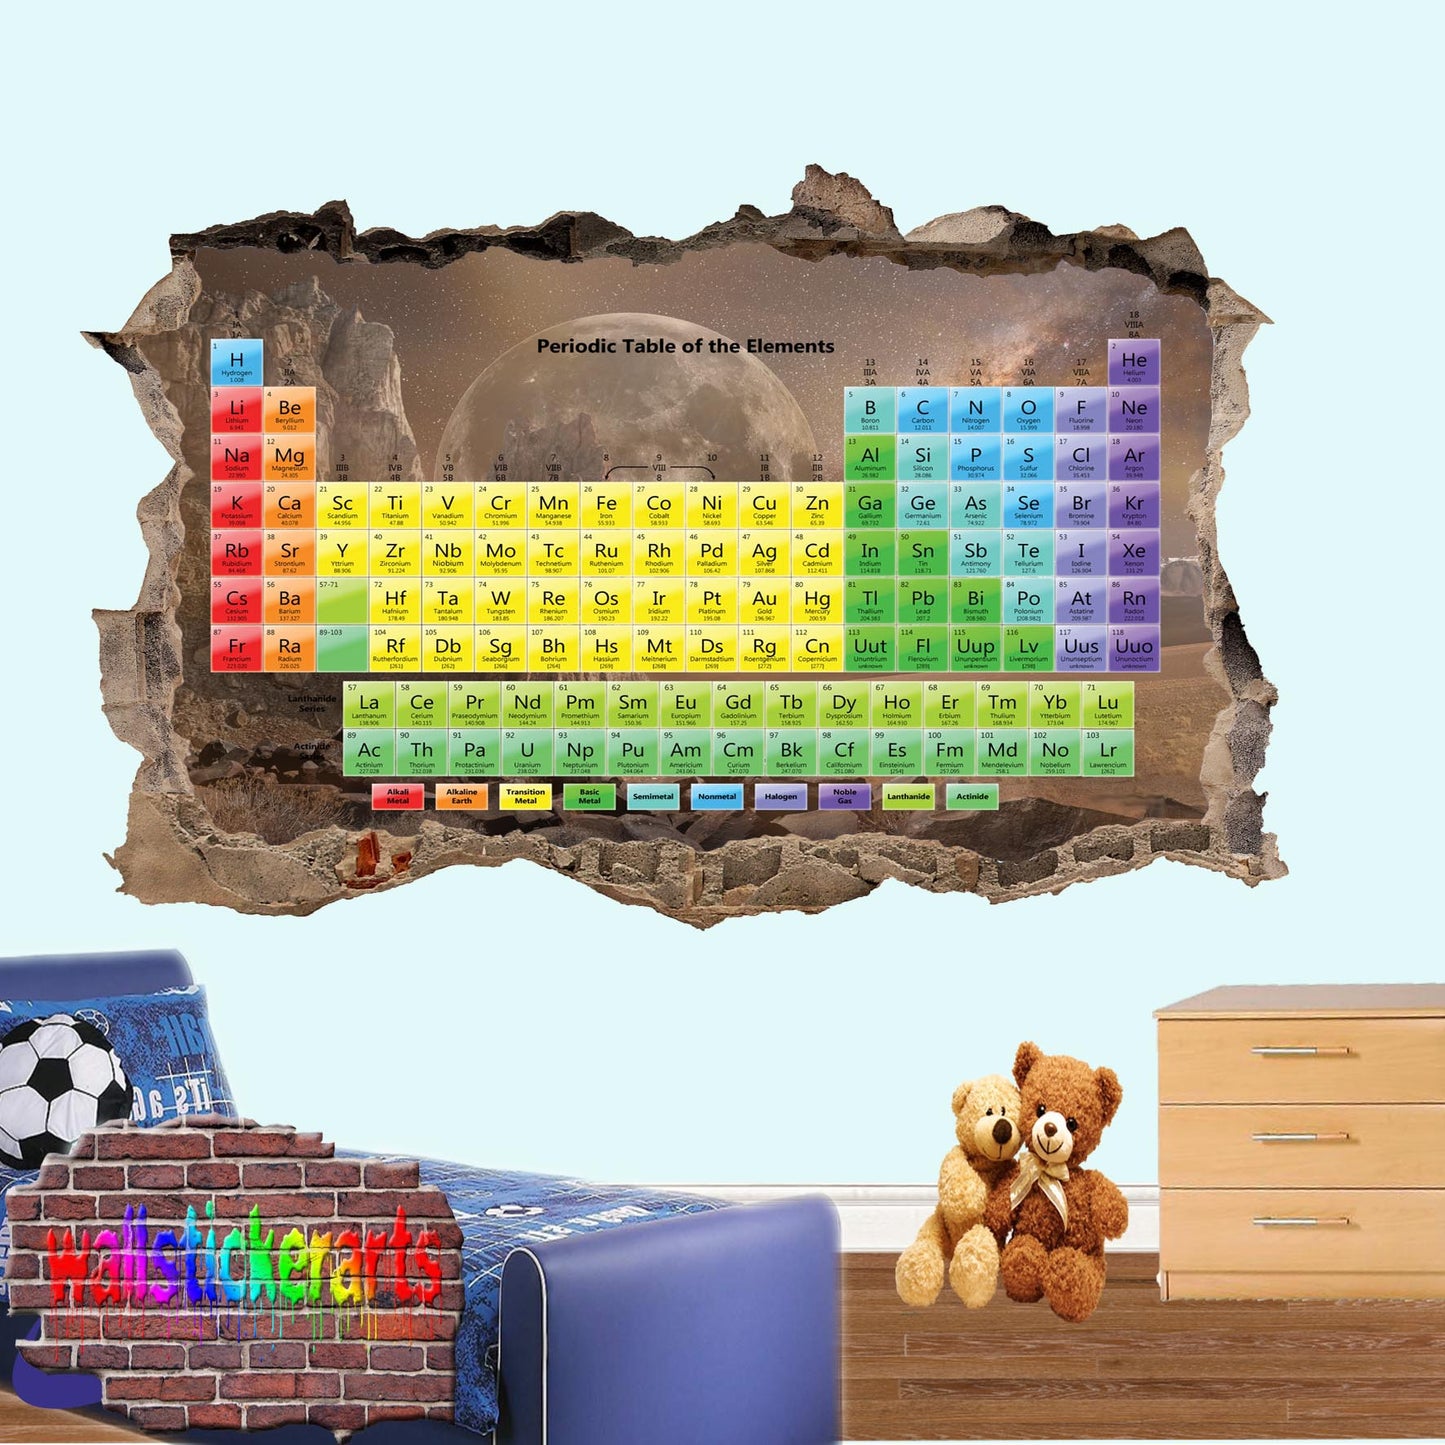 Chemistry Periodic Table of Elements 3d Art Smashed Effect Wall Sticker Room Office Nursery Shop Decoration Decal Mural YT2